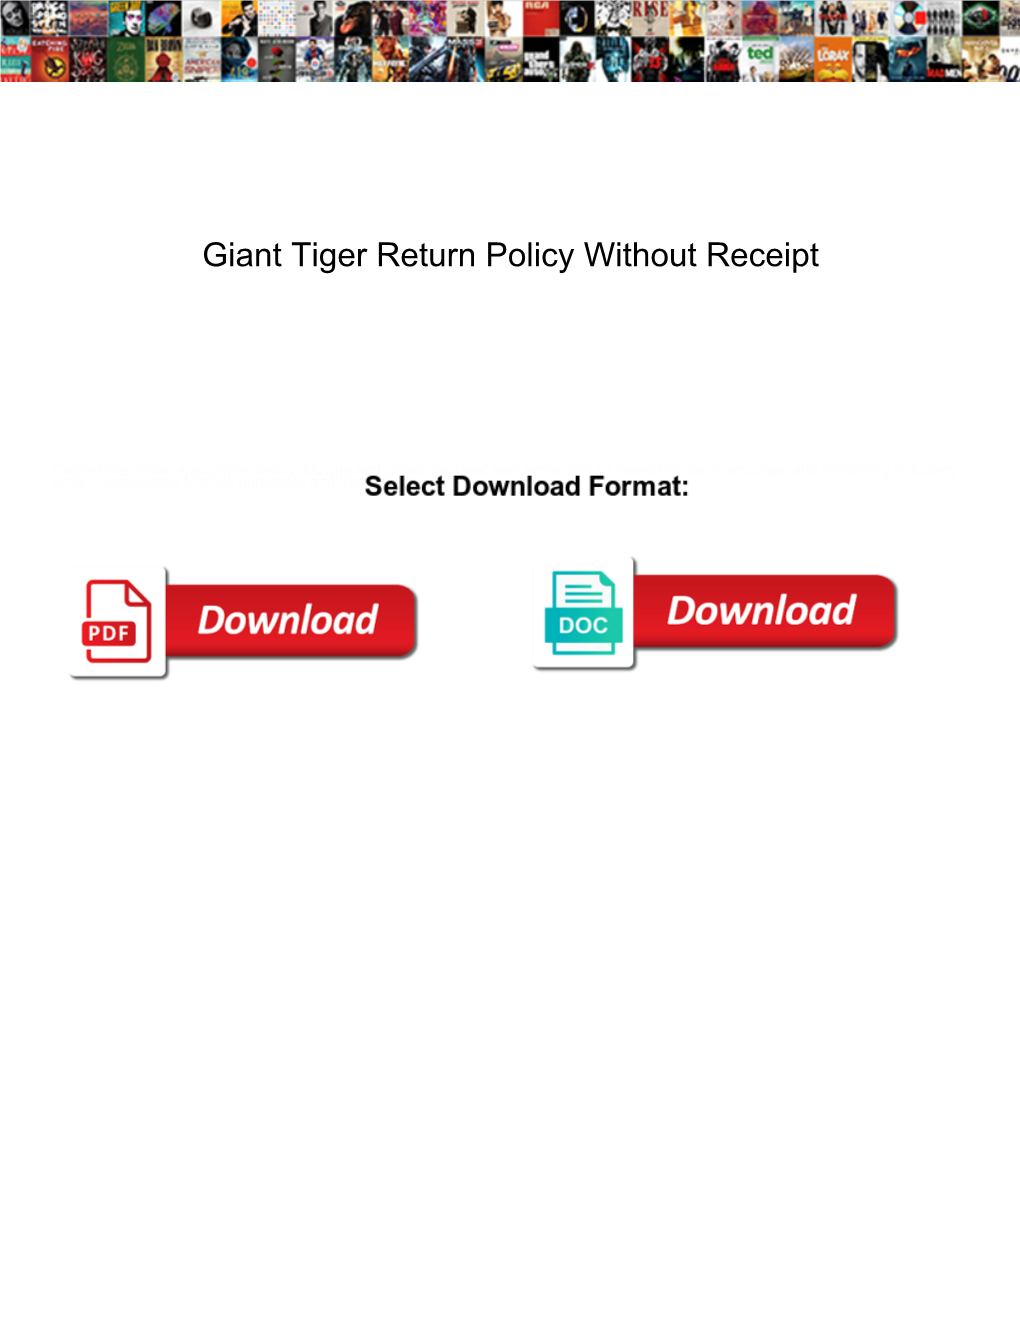 Giant Tiger Return Policy Without Receipt